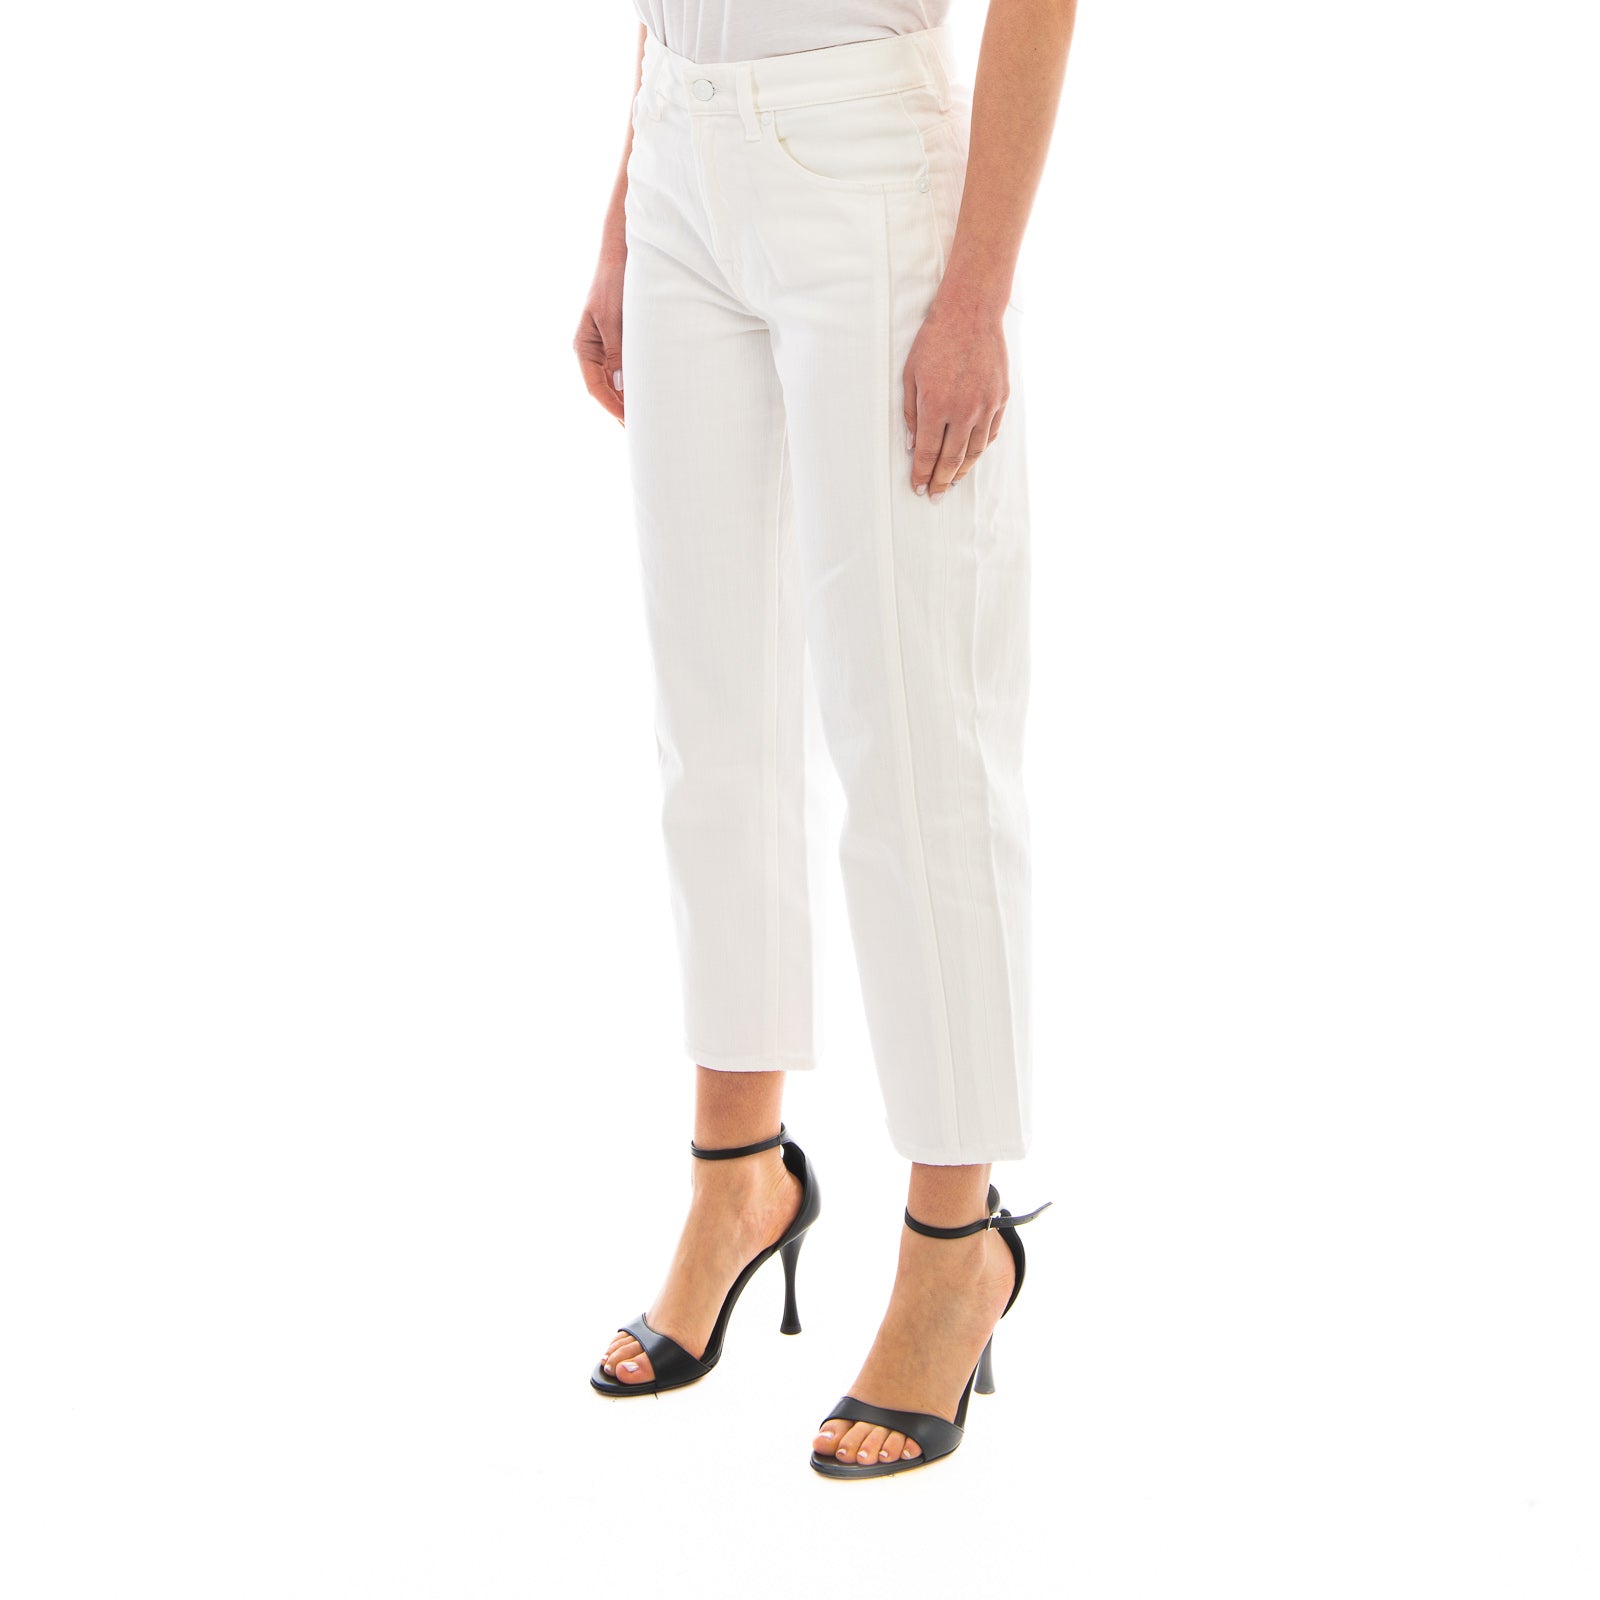 Jeans 7 FOR ALL MANKIND The modern straight
Bianco